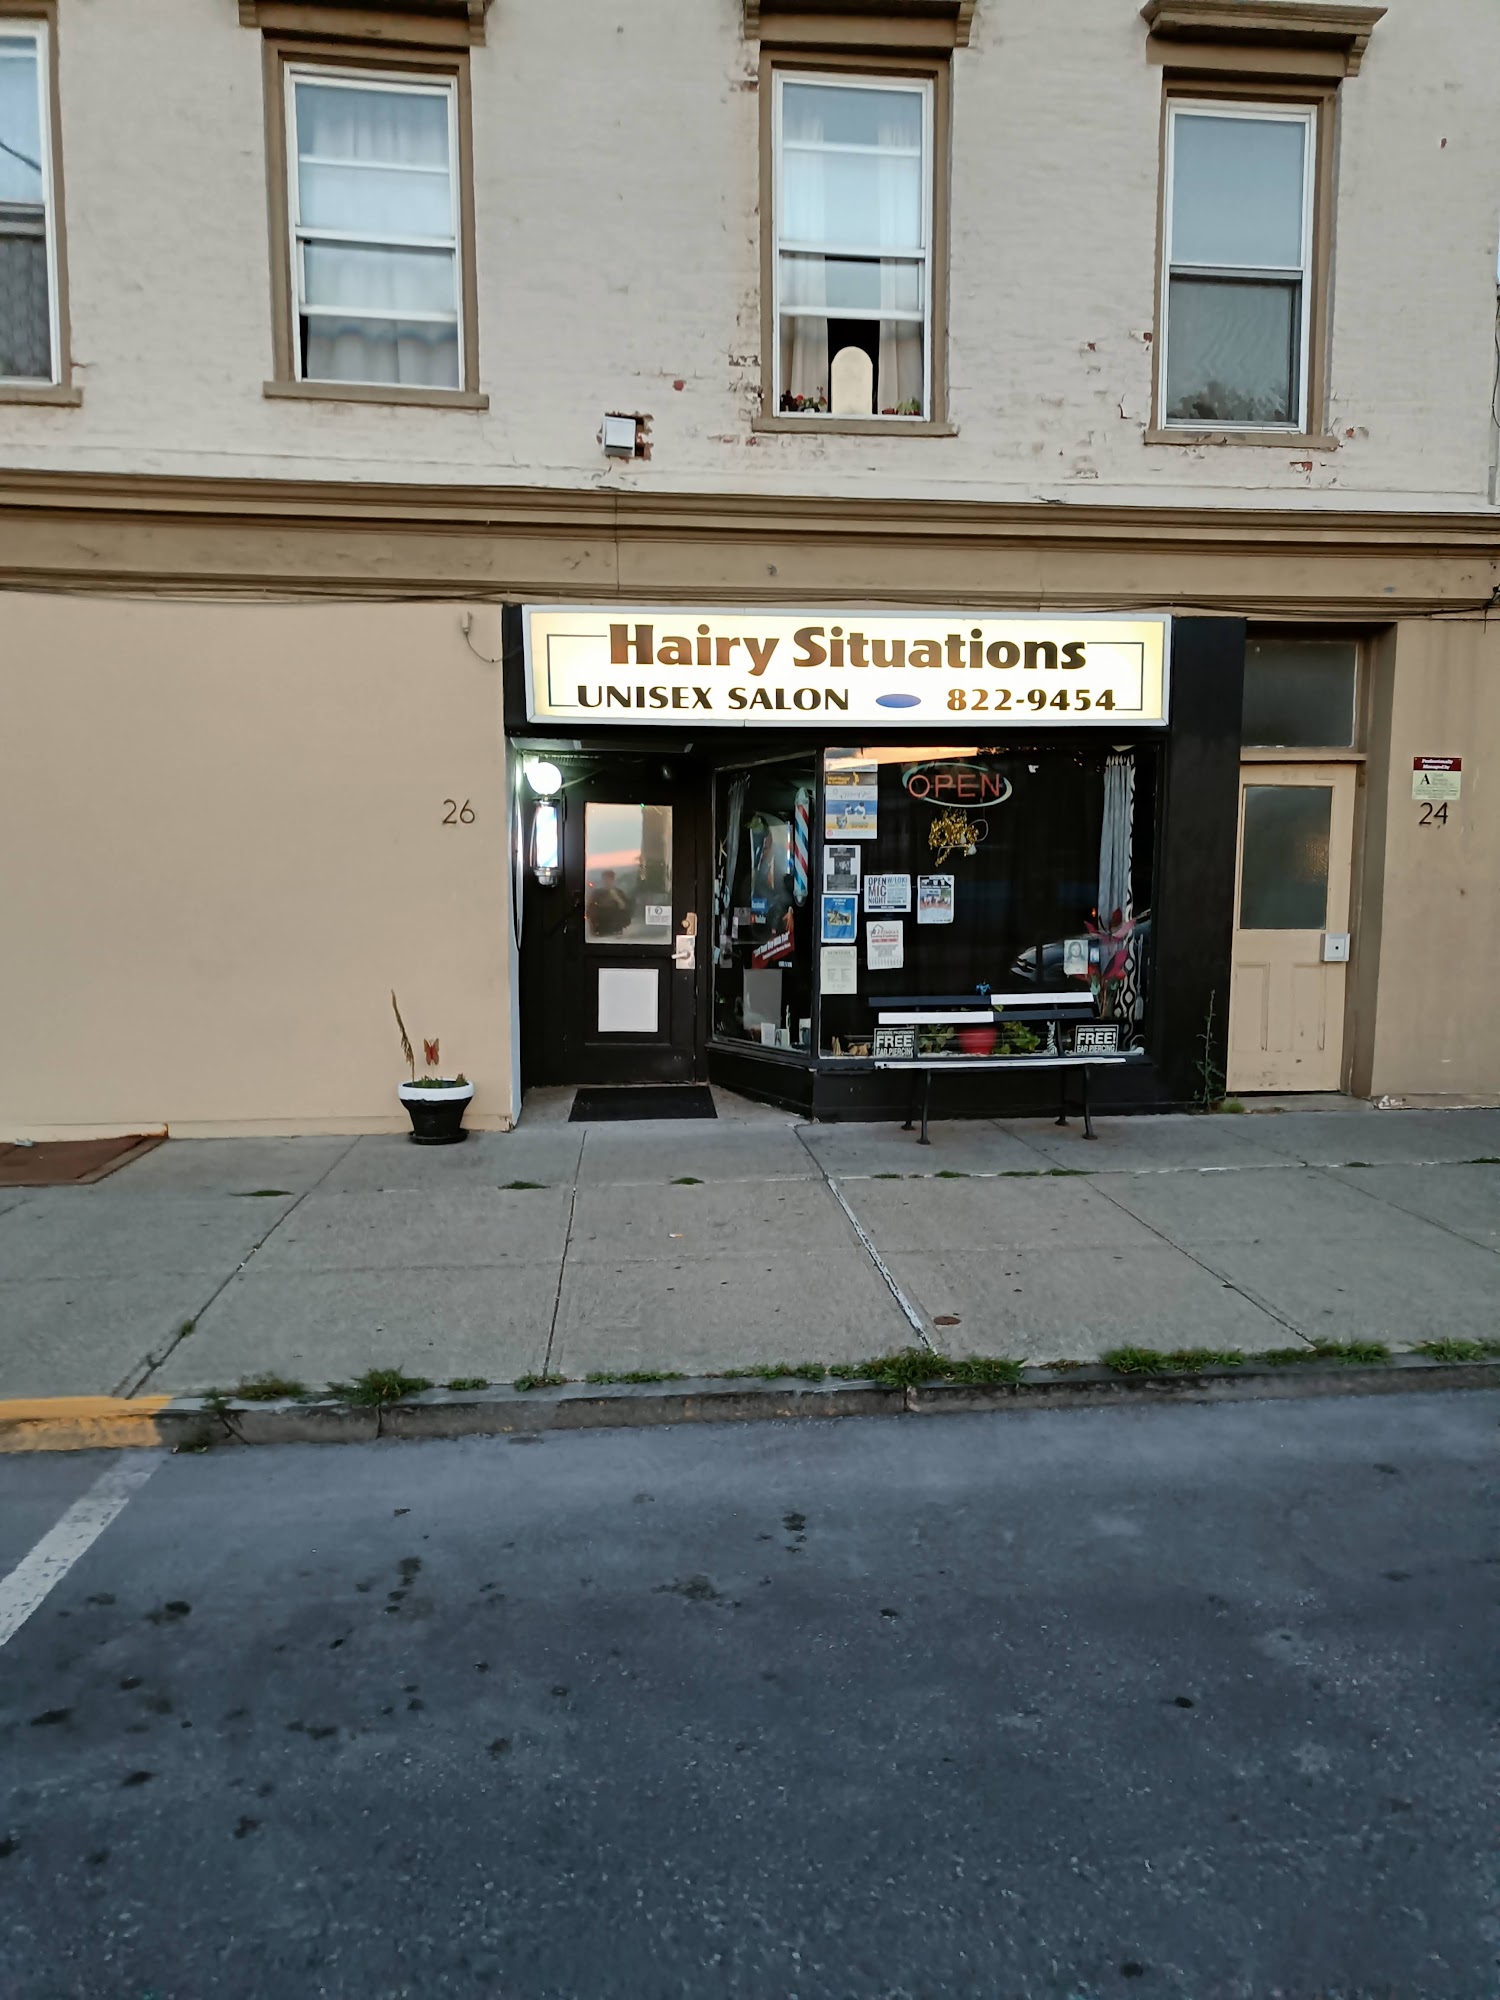 Hairy Situations 26 Park Pl, Hudson New York 12534